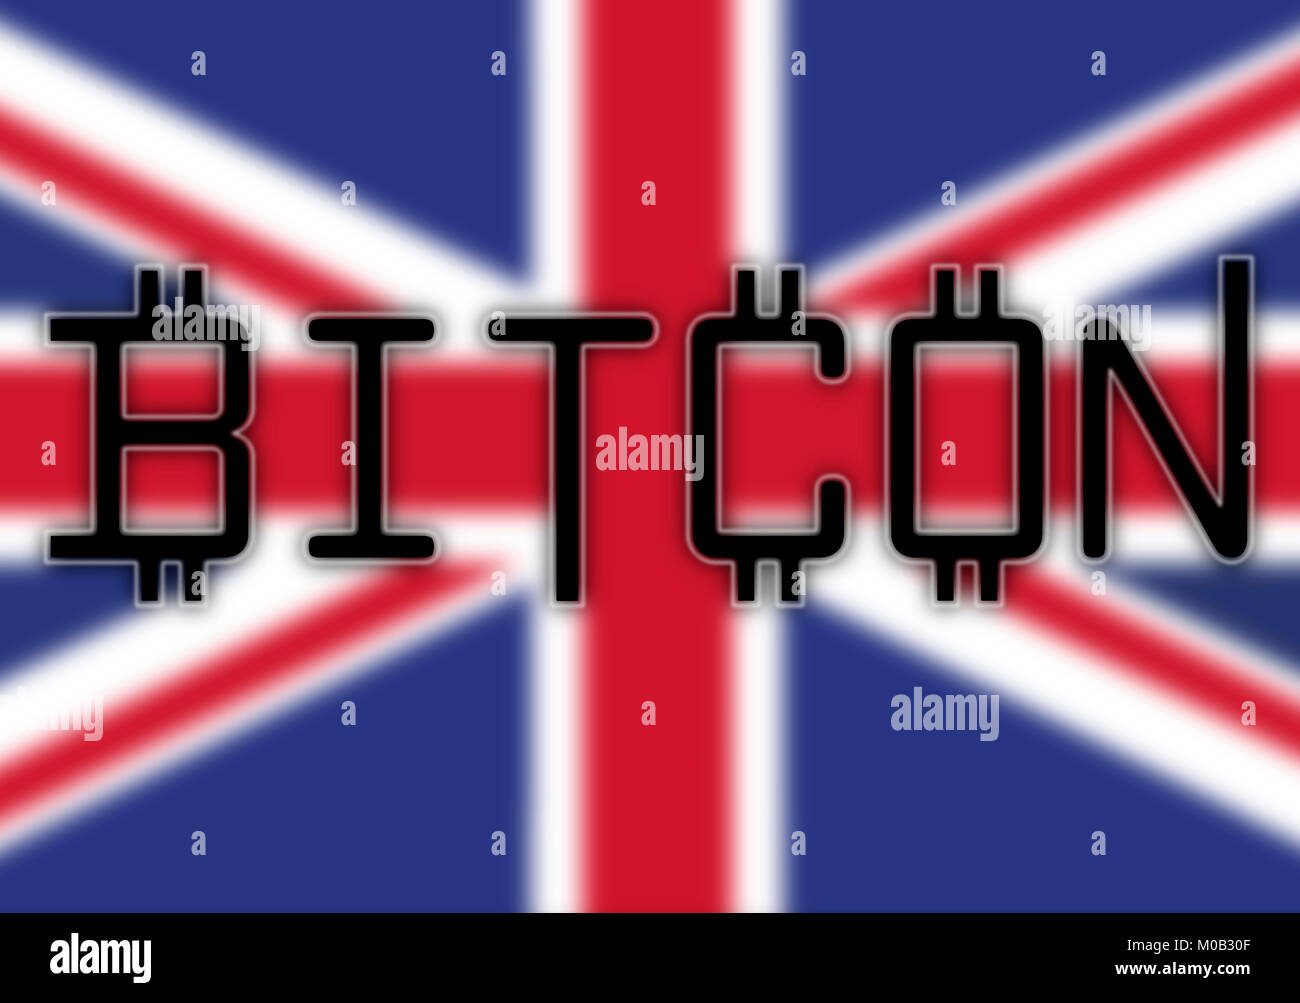 The word Bitcon in front of a Union Jack background Stock Photo